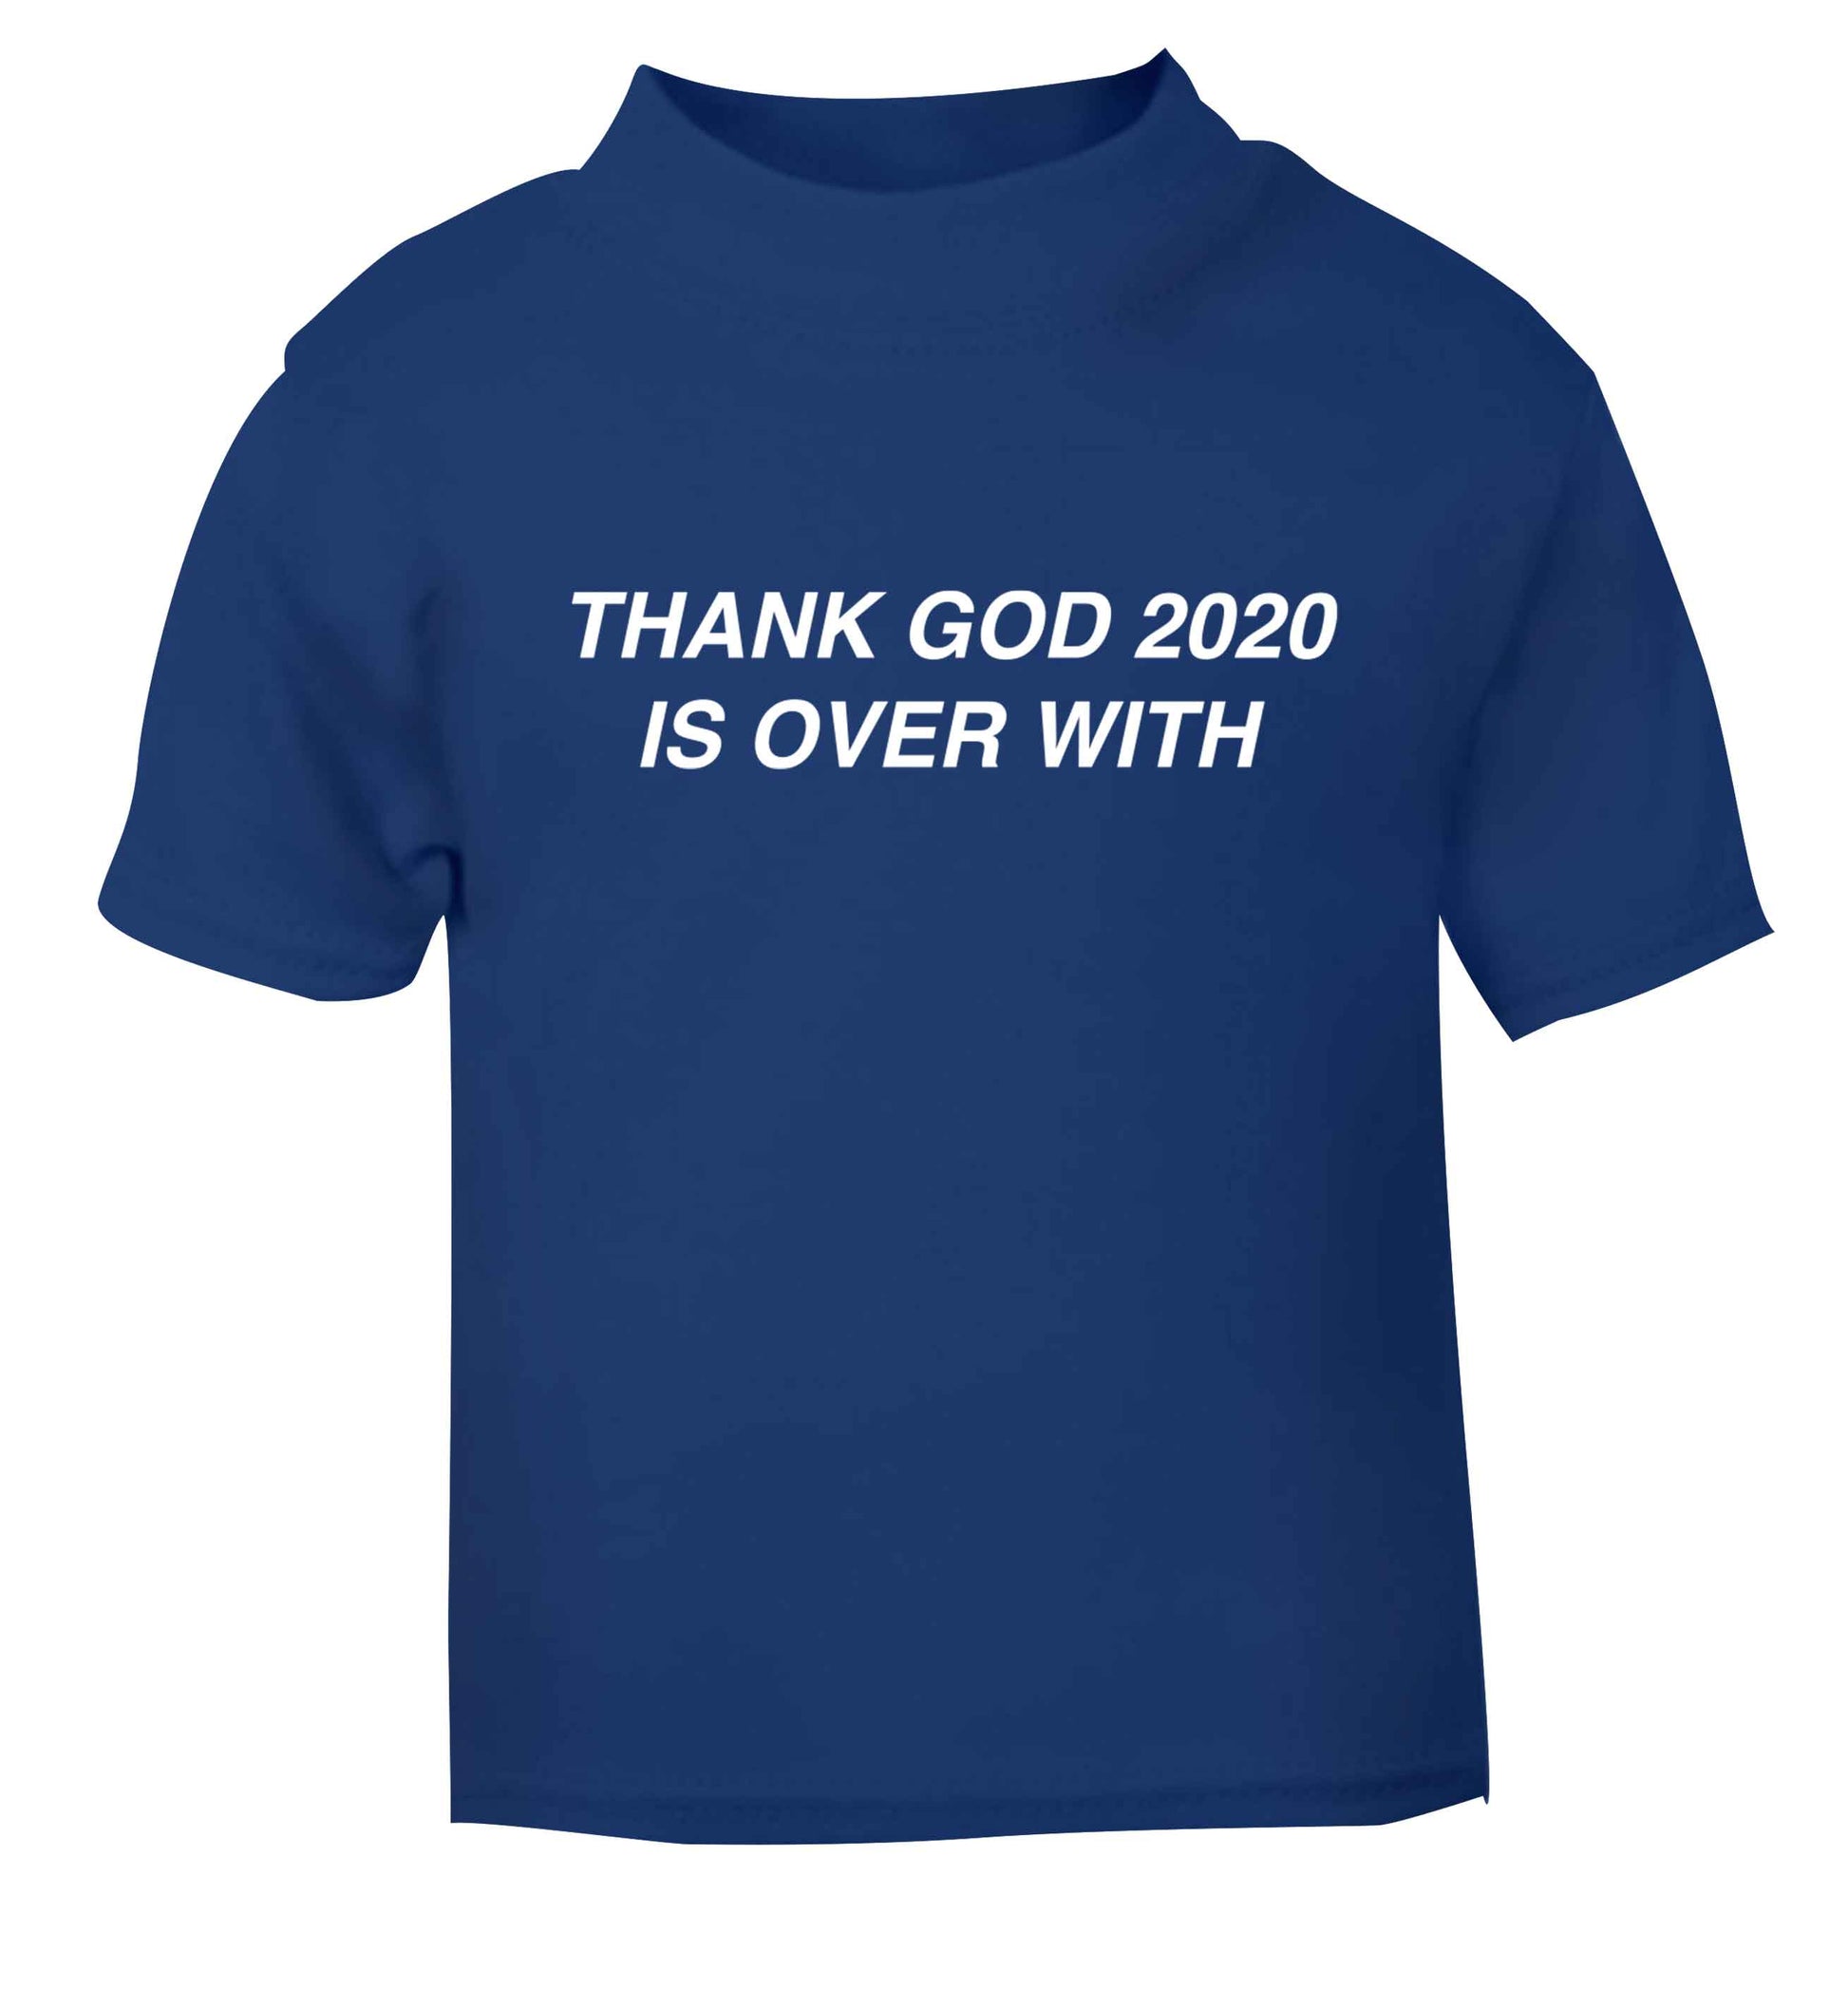 Thank god 2020 is over with blue baby toddler Tshirt 2 Years